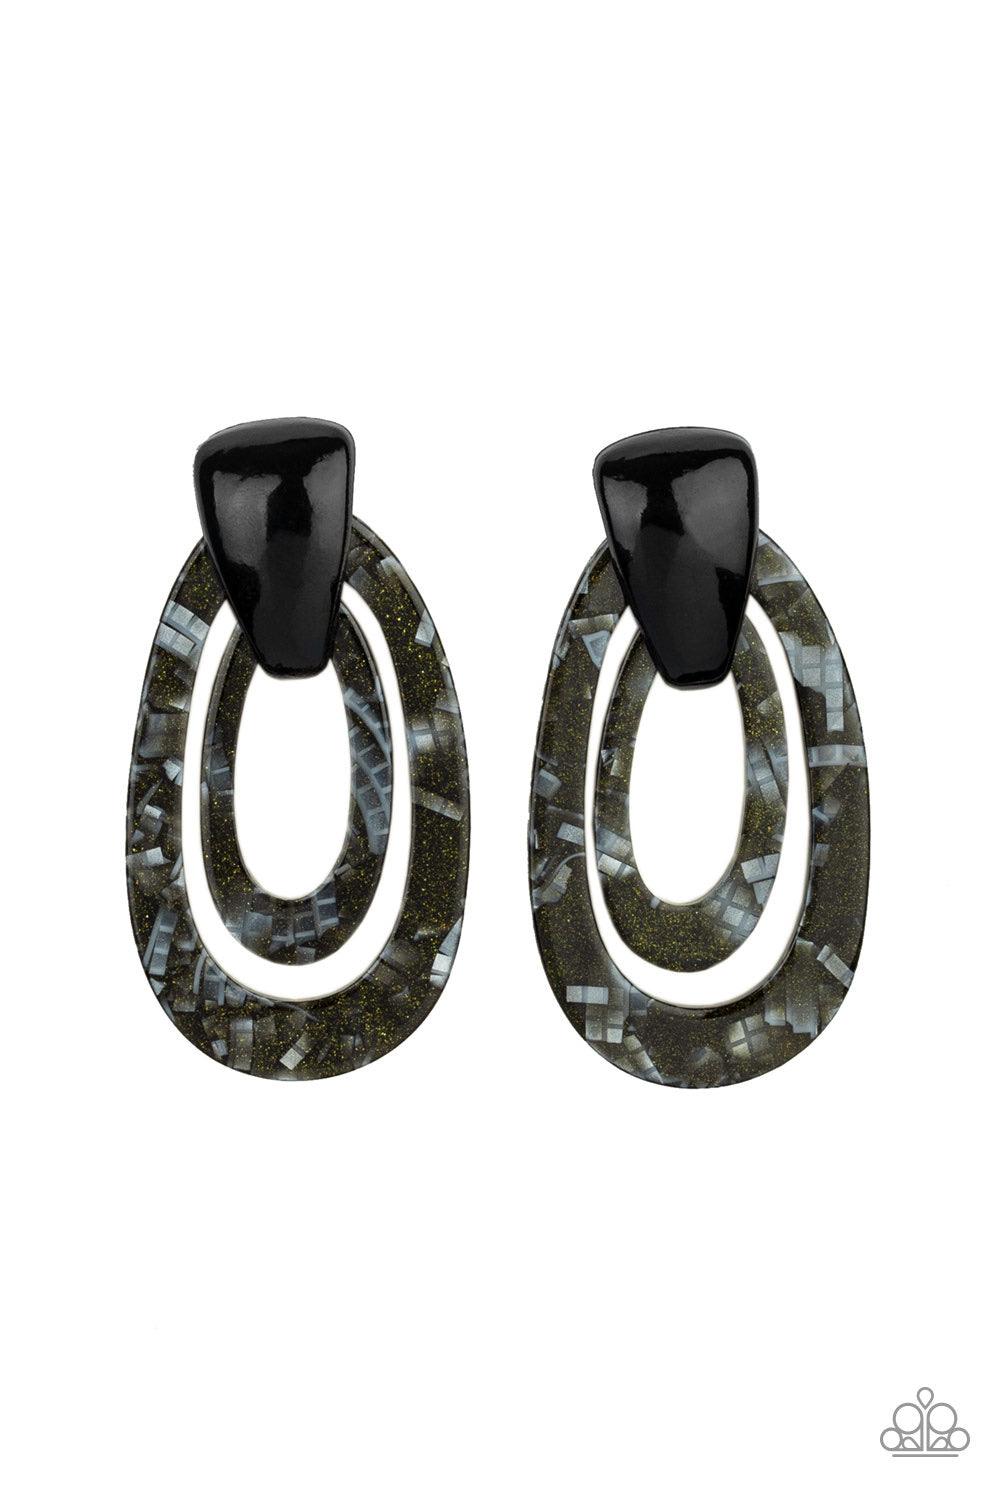 Paparazzi Accessories The HAUTE Zone - Black Featuring a glittery geometric print, two acrylic hoops are pinched between a triangular acrylic fitting for a retro look. Earring attaches to a standard post fitting. Jewelry